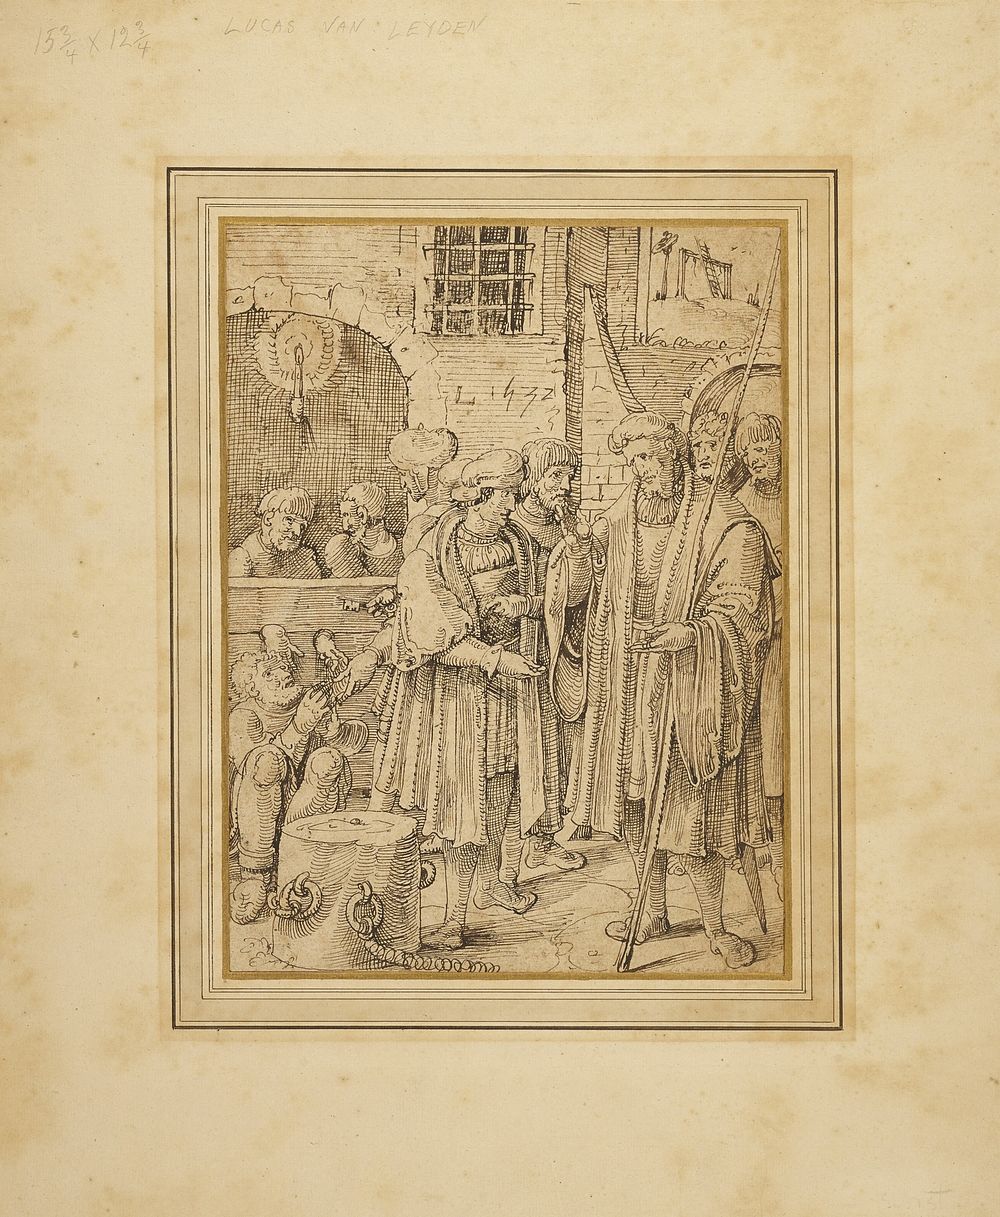 The Seven Acts of Mercy: Freeing the Prisoners by Pieter Cornelisz  Kunst